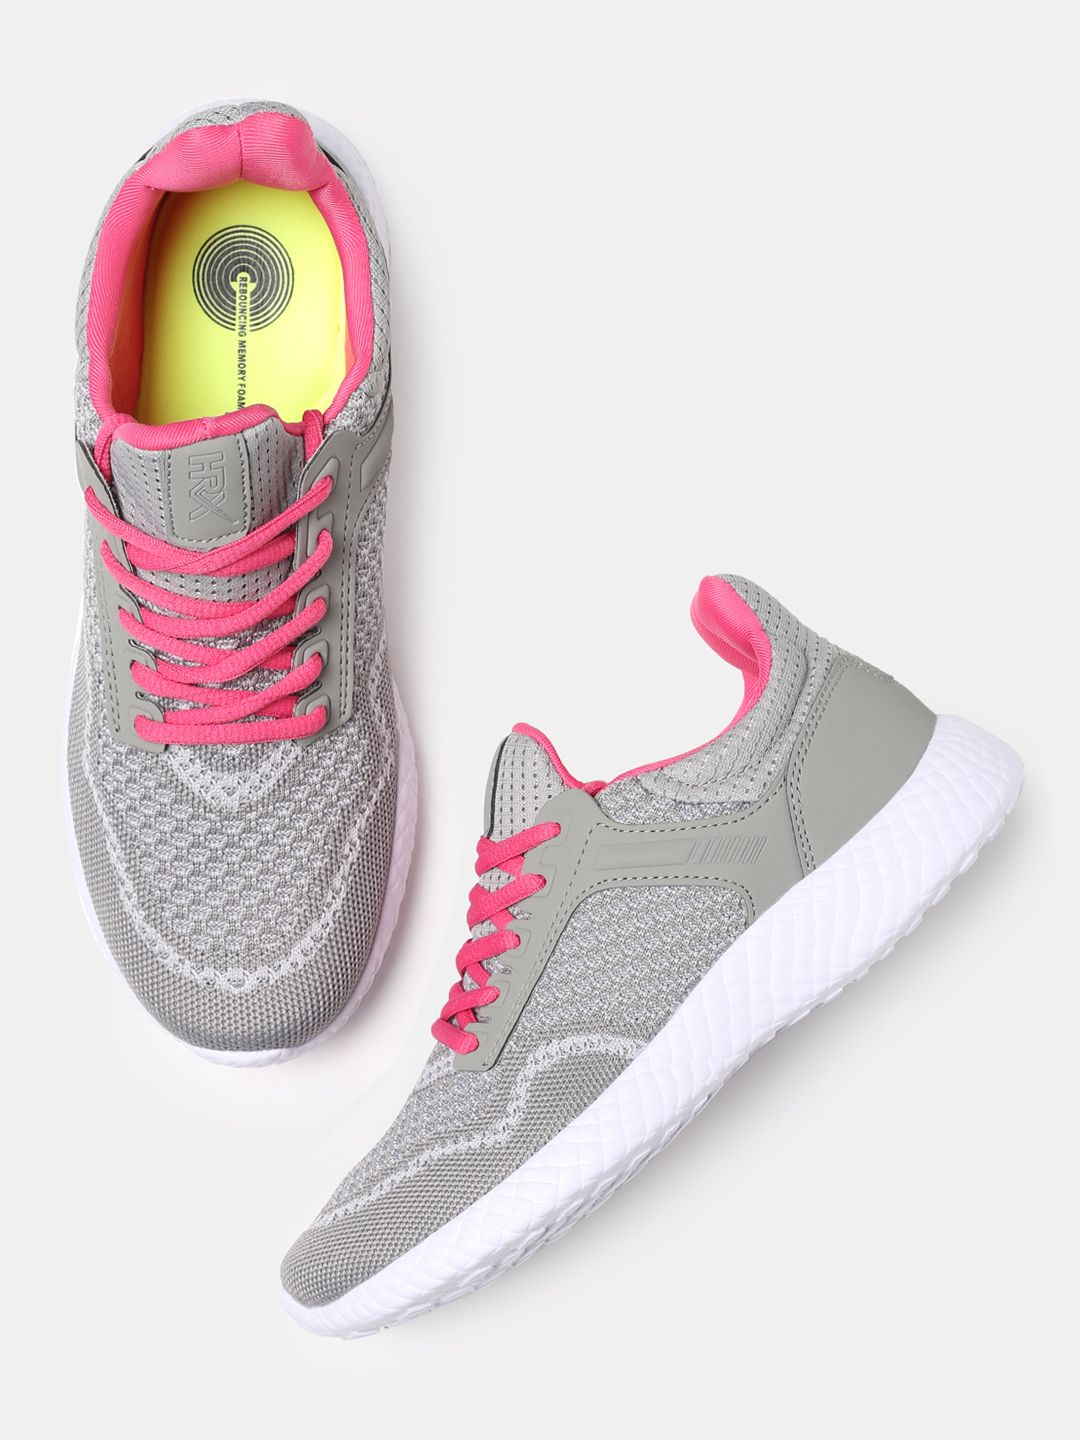 Hrx By Hrithik Roshan Grey Running Shoes for women - Get stylish shoes ...